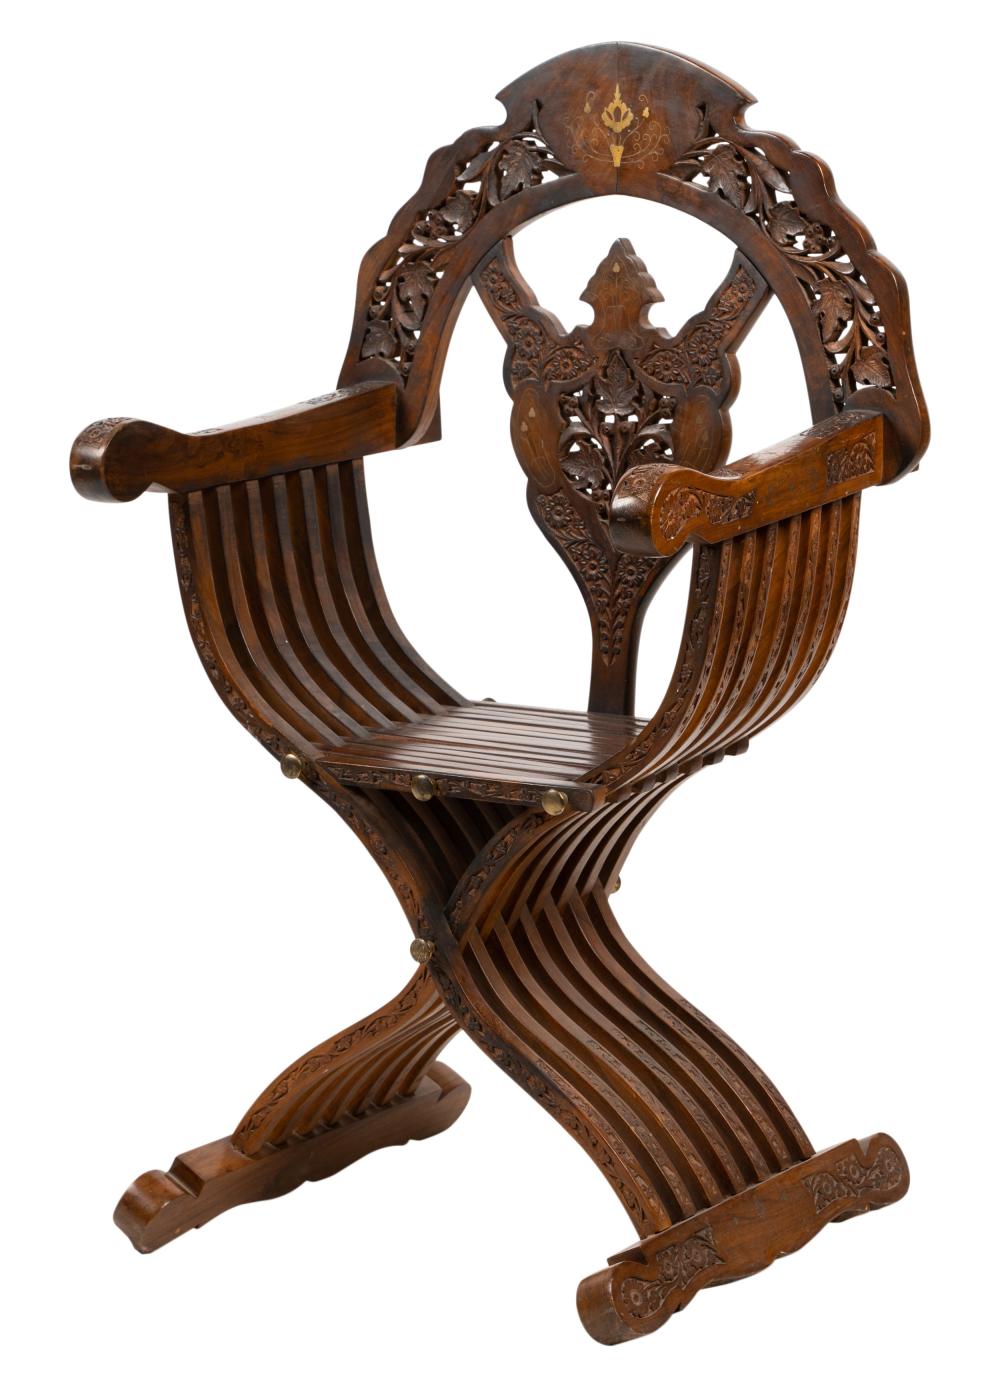 ANGLO INDIAN SAVONAROLA STYLE CHAIRAnglo Indian 30485a